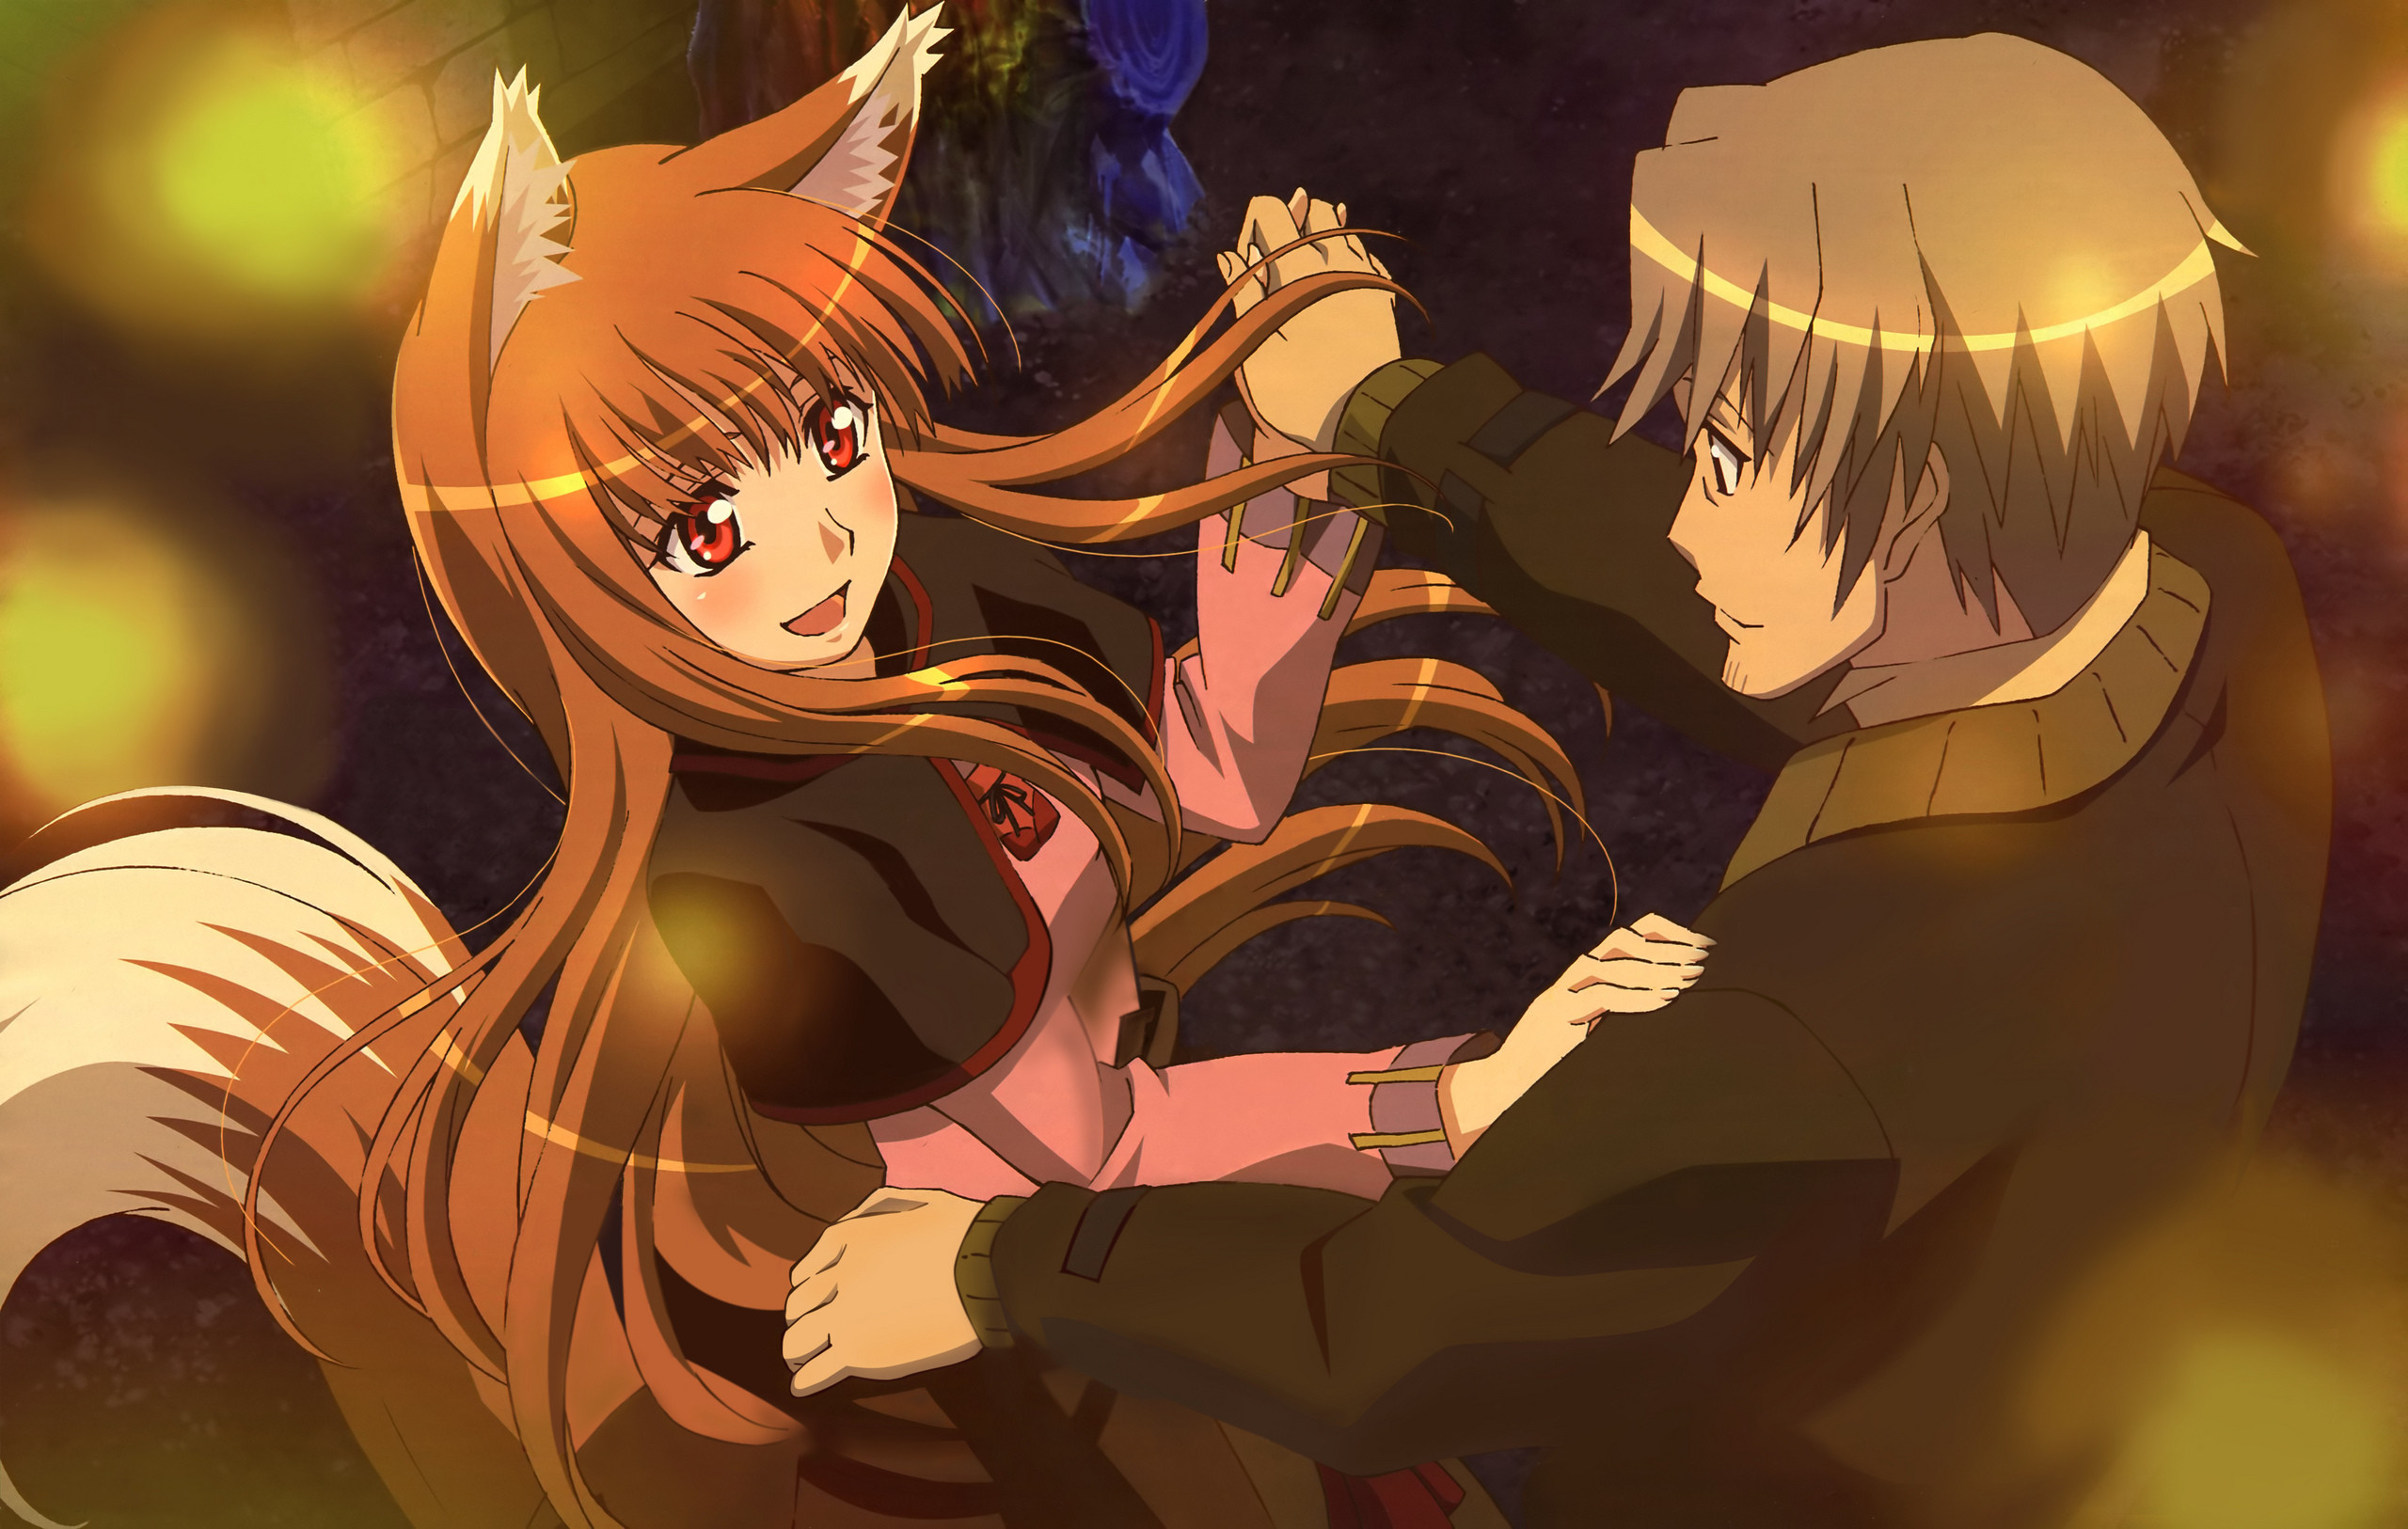 Spice and wolf images lawrence and holo dancing 2gether HD wallpaper and background photos